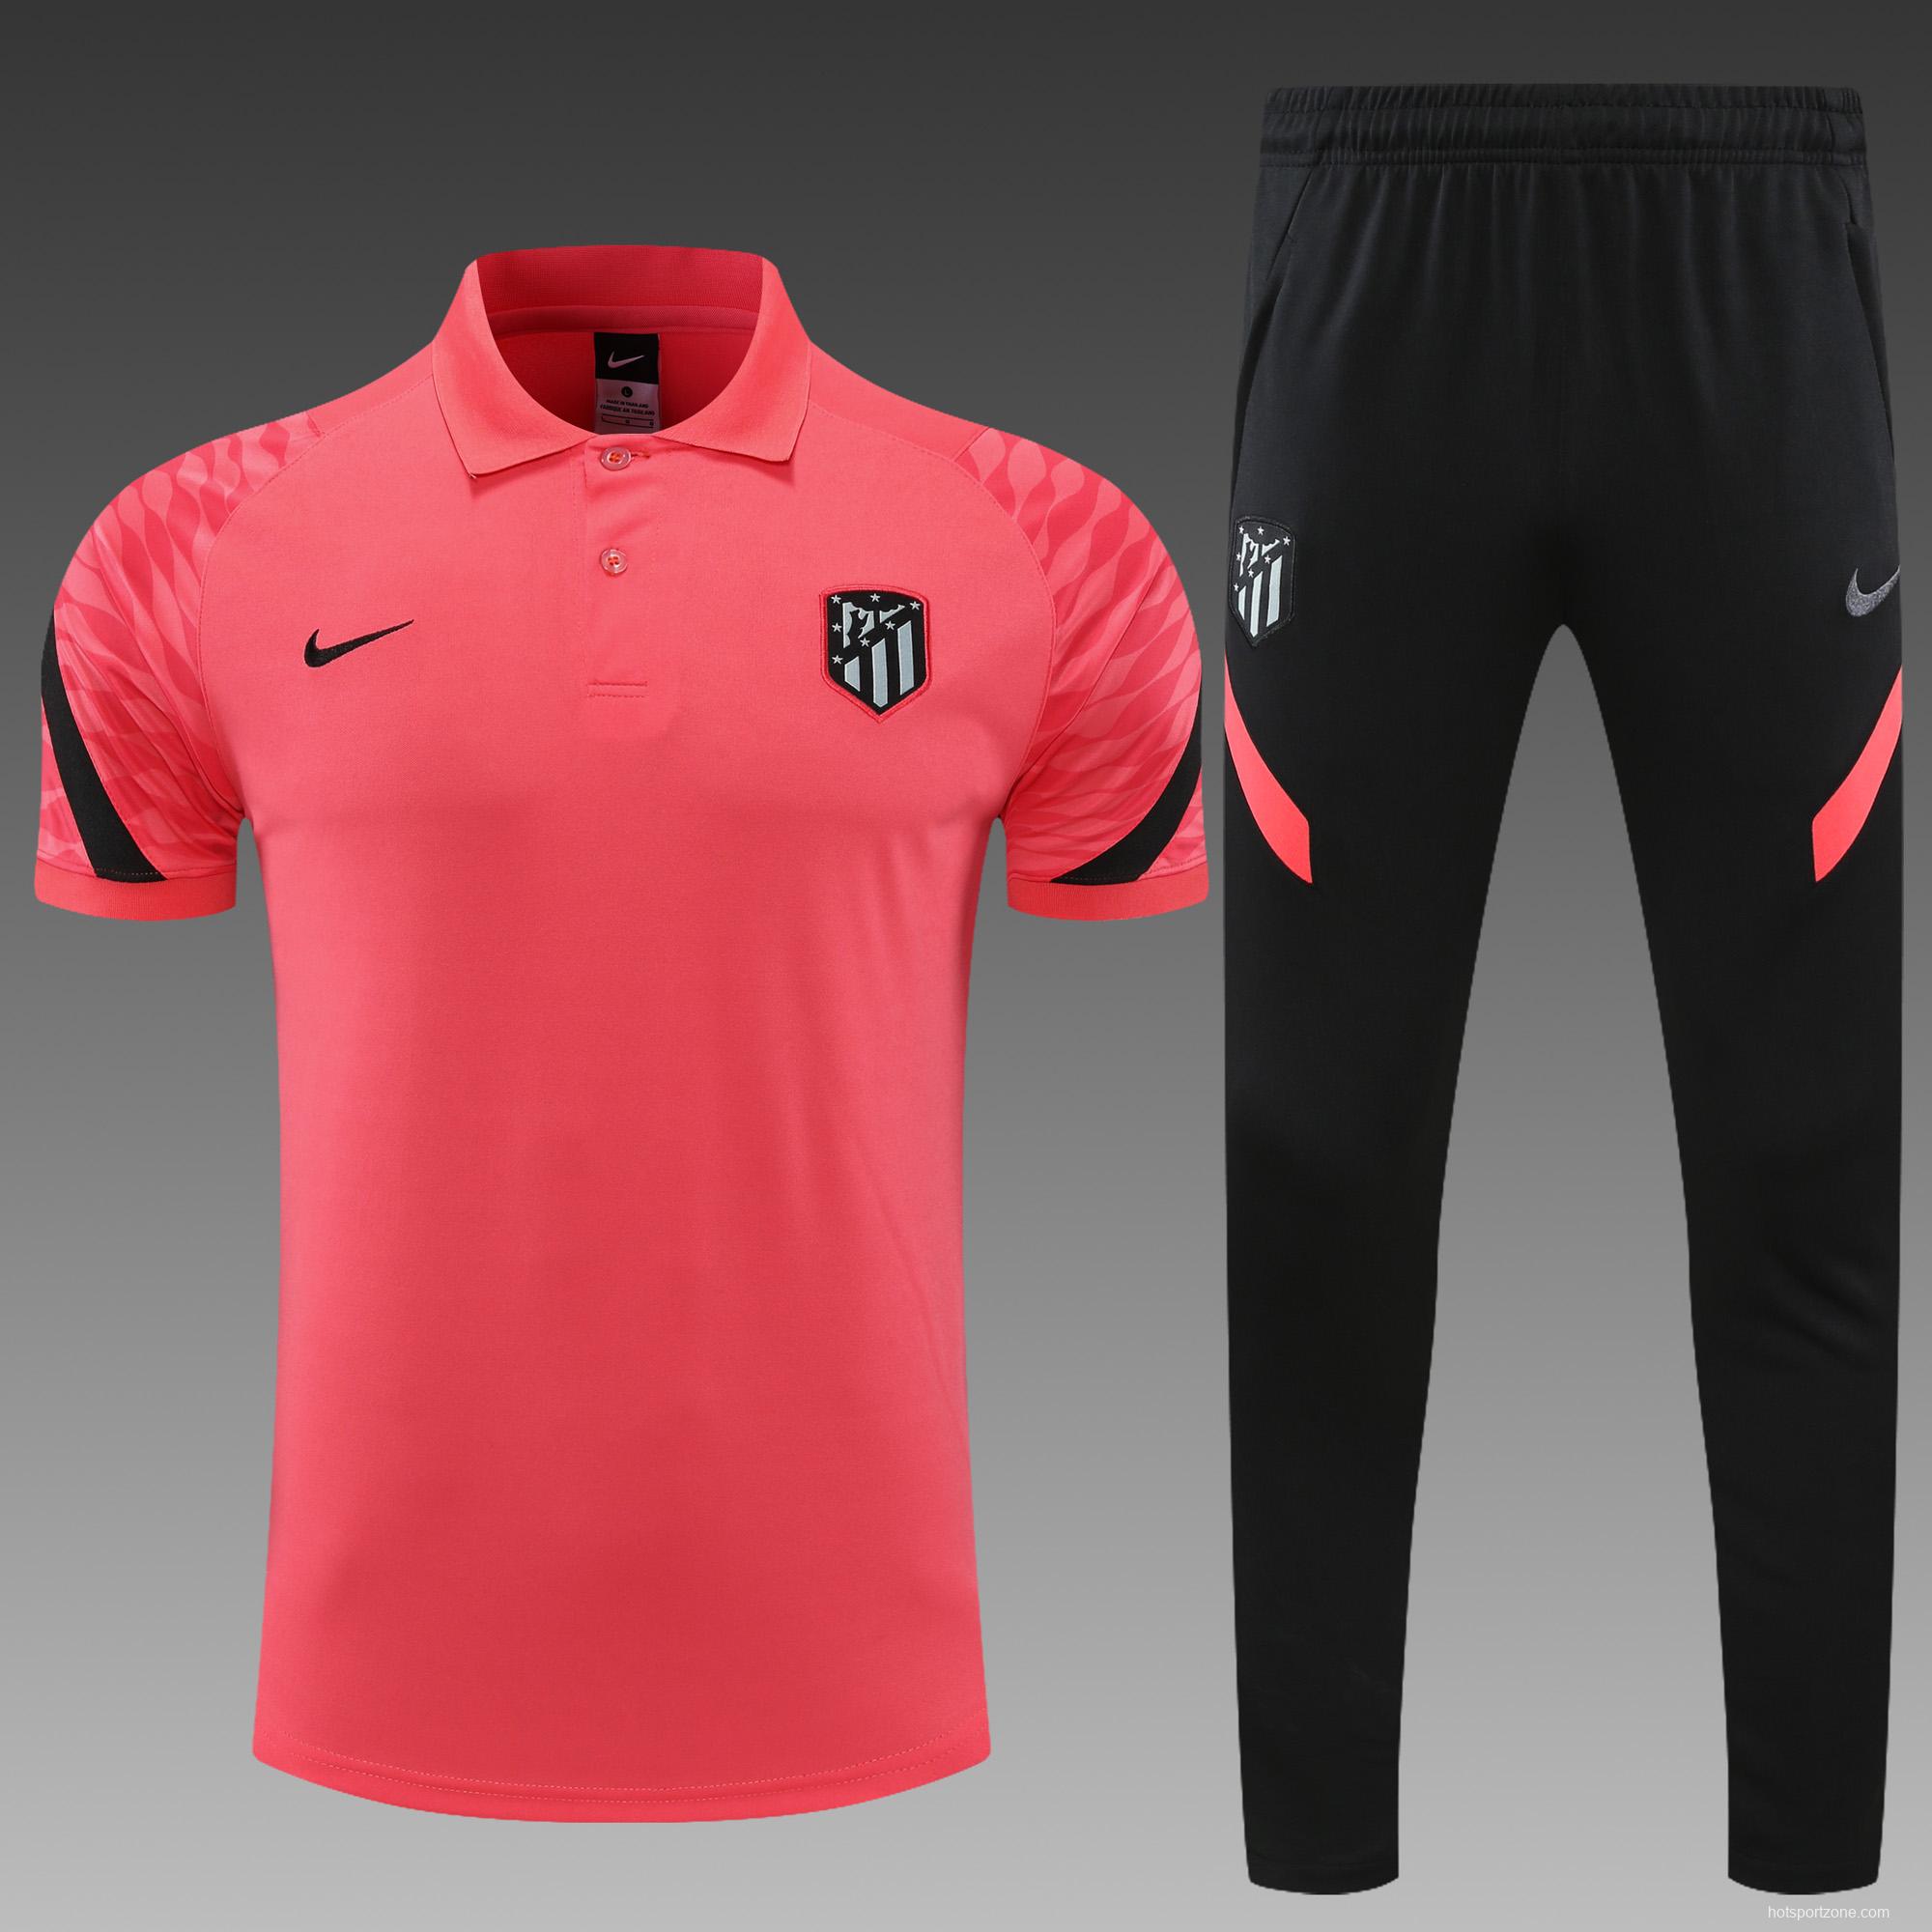 Atletico Madrid POLO kit Pink(not supported to be sold separately)